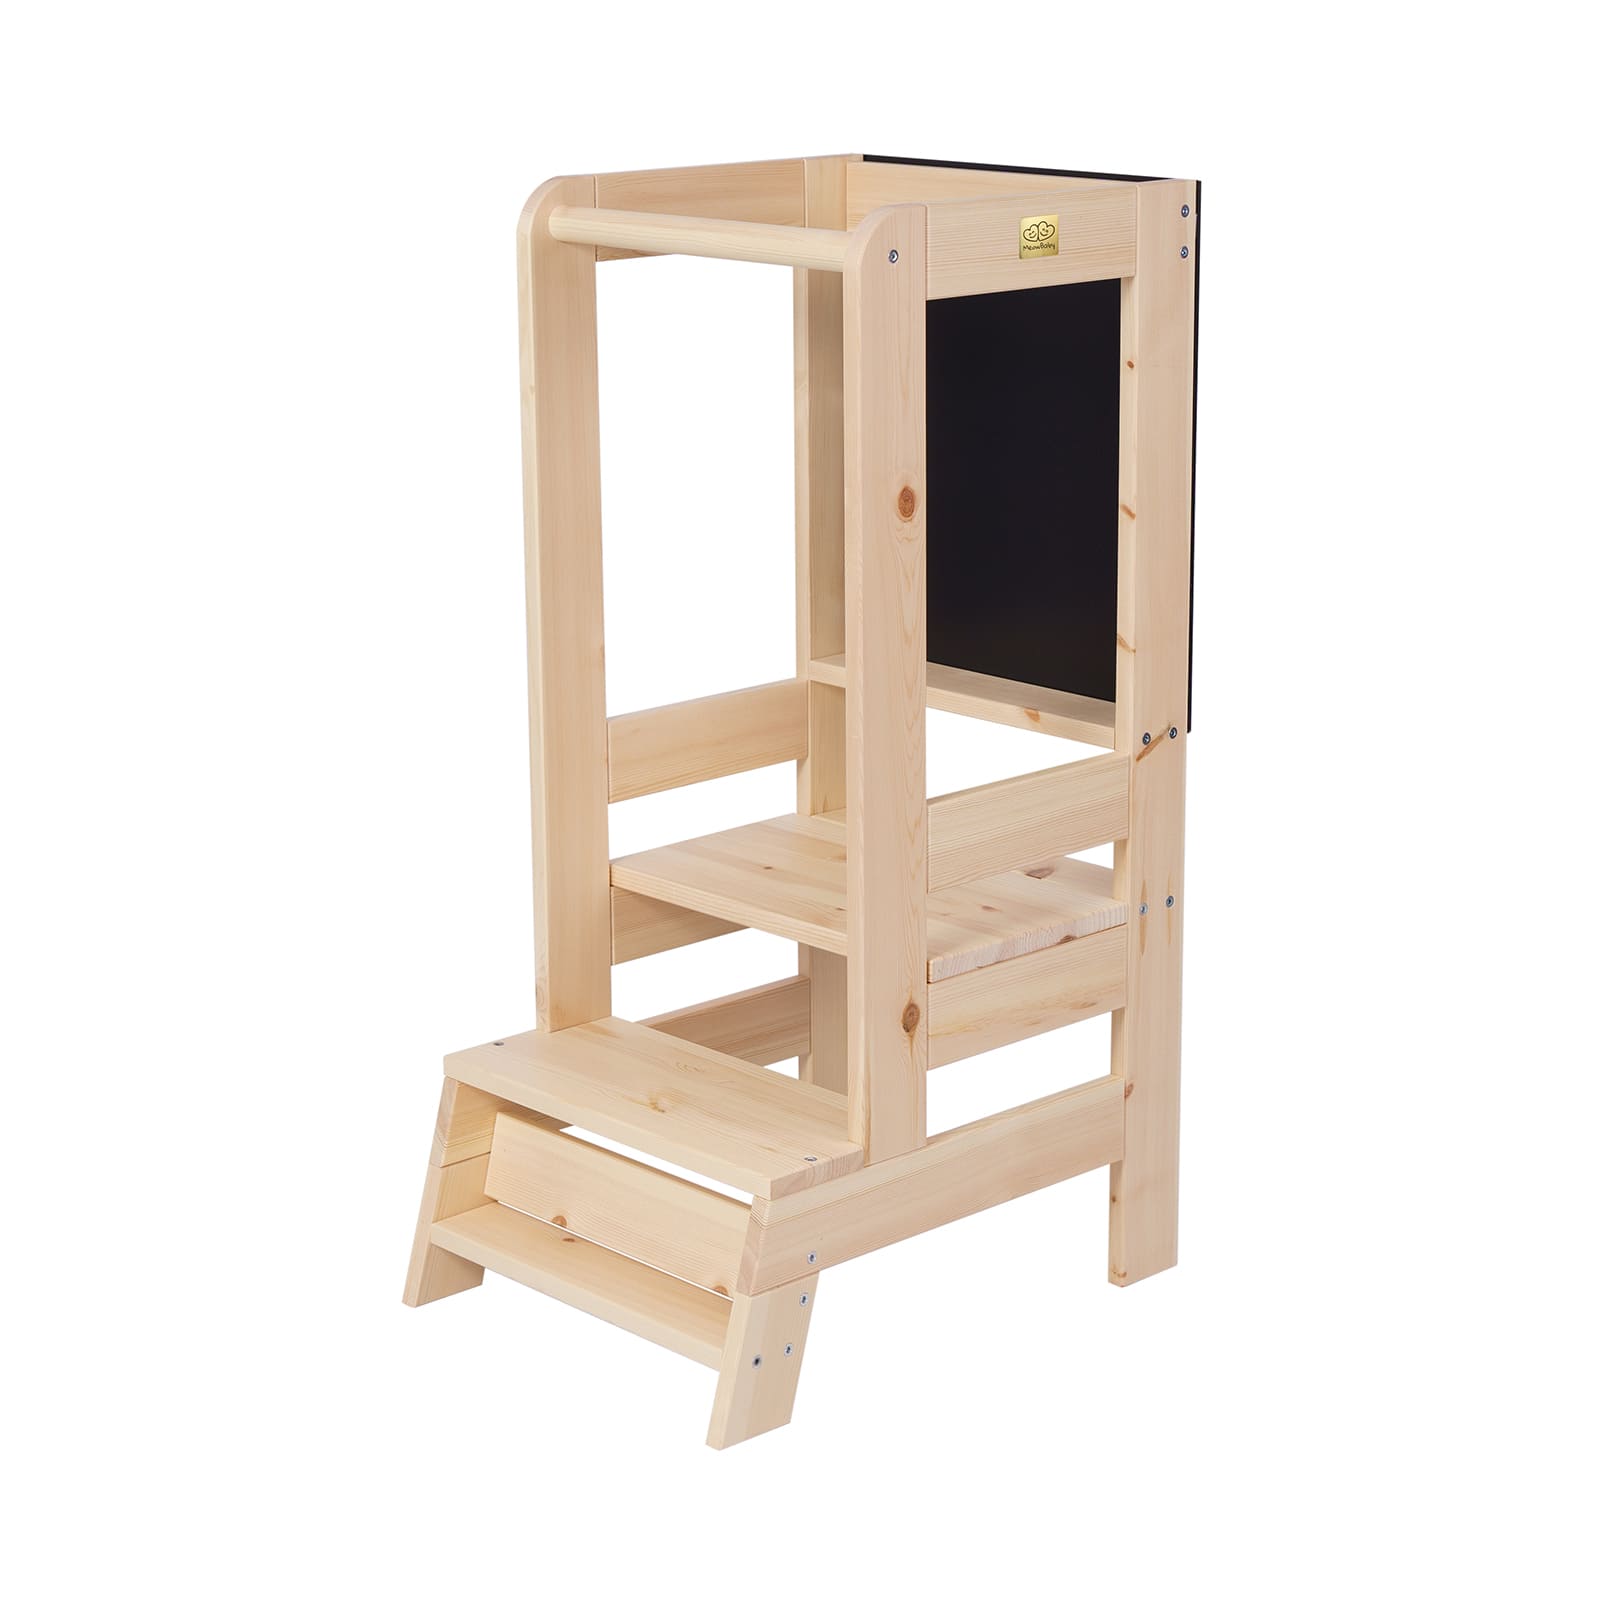 Wooden Kitchen Helper - Learning Tower With Board For Kids By MeowBaby